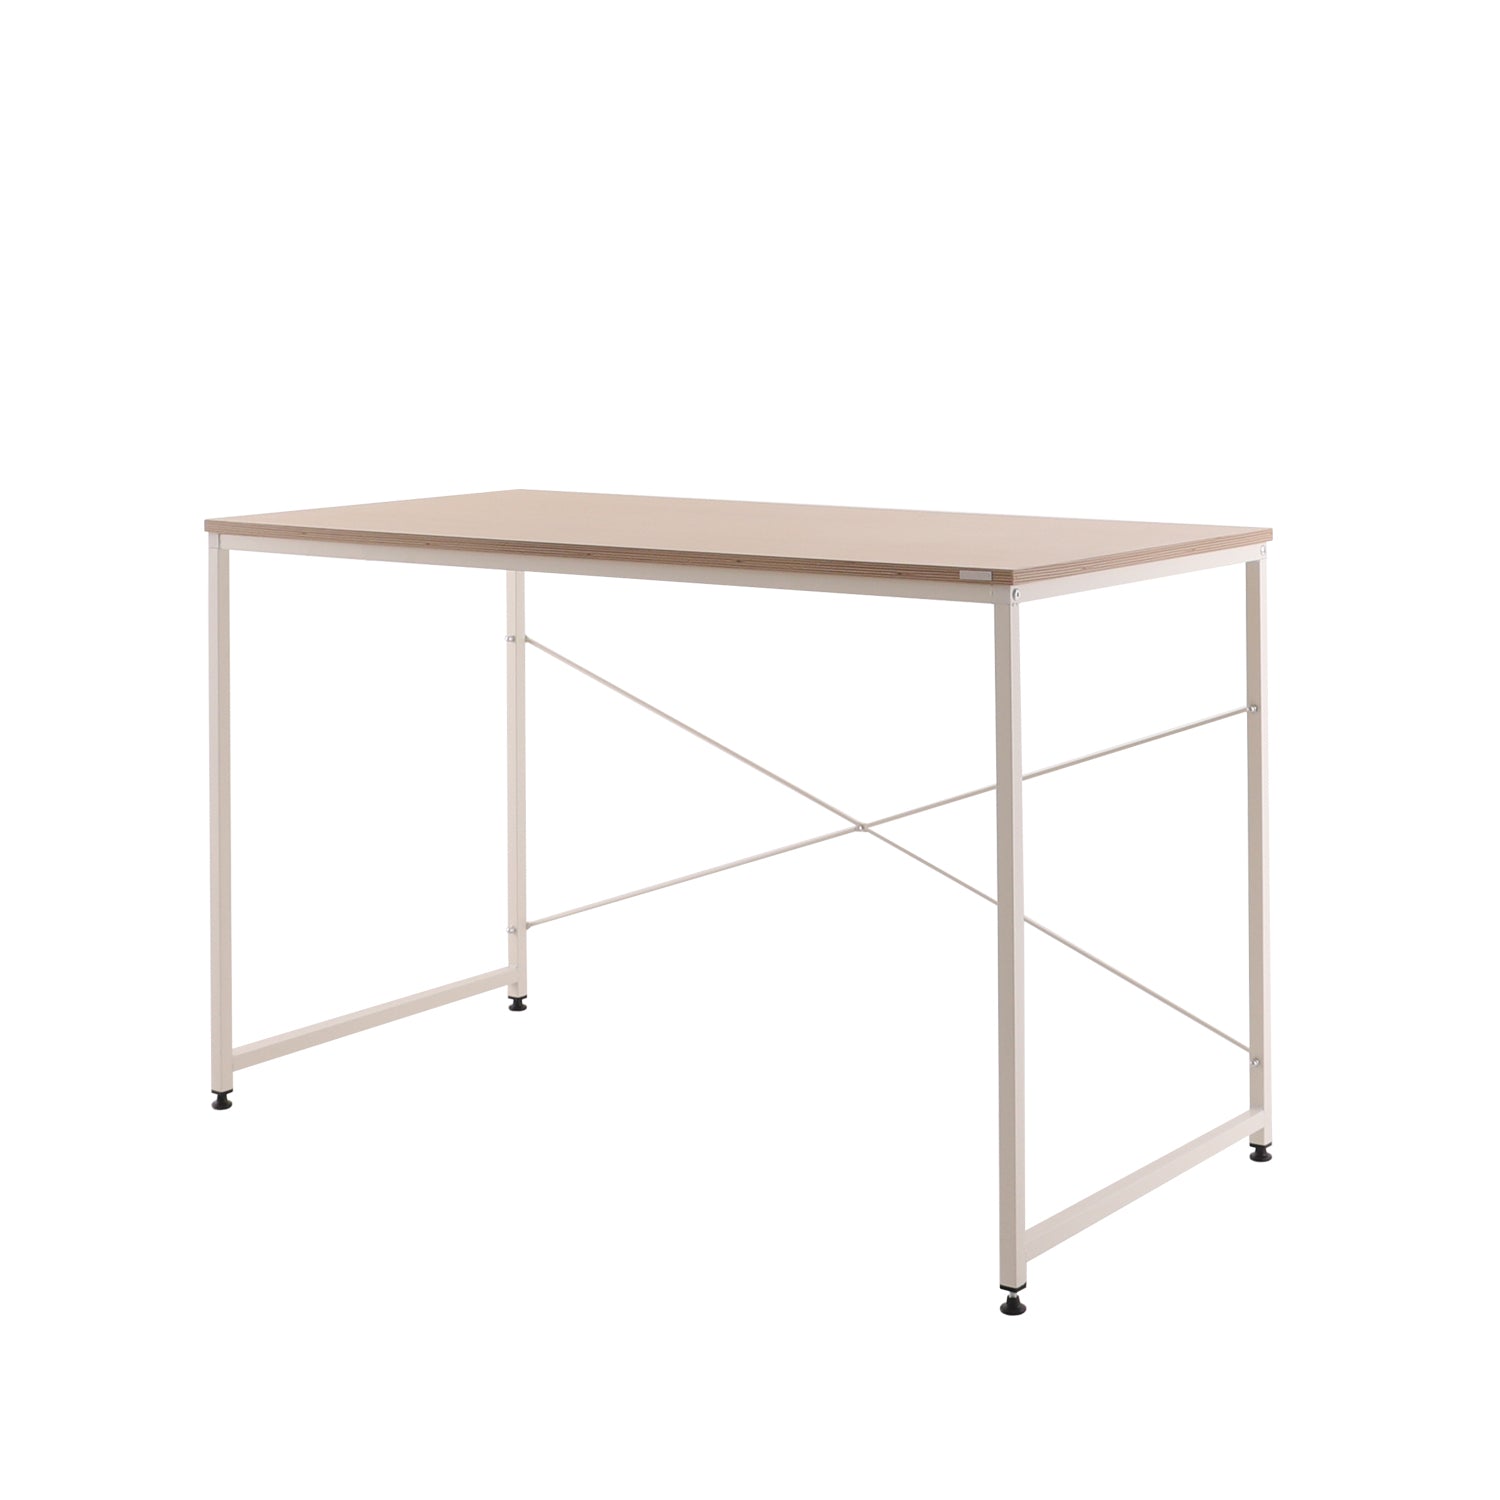 SOFSYS modern industrial computer desk with oak table top and white metal frame. simple stylish desk for working, gaming, writing, more